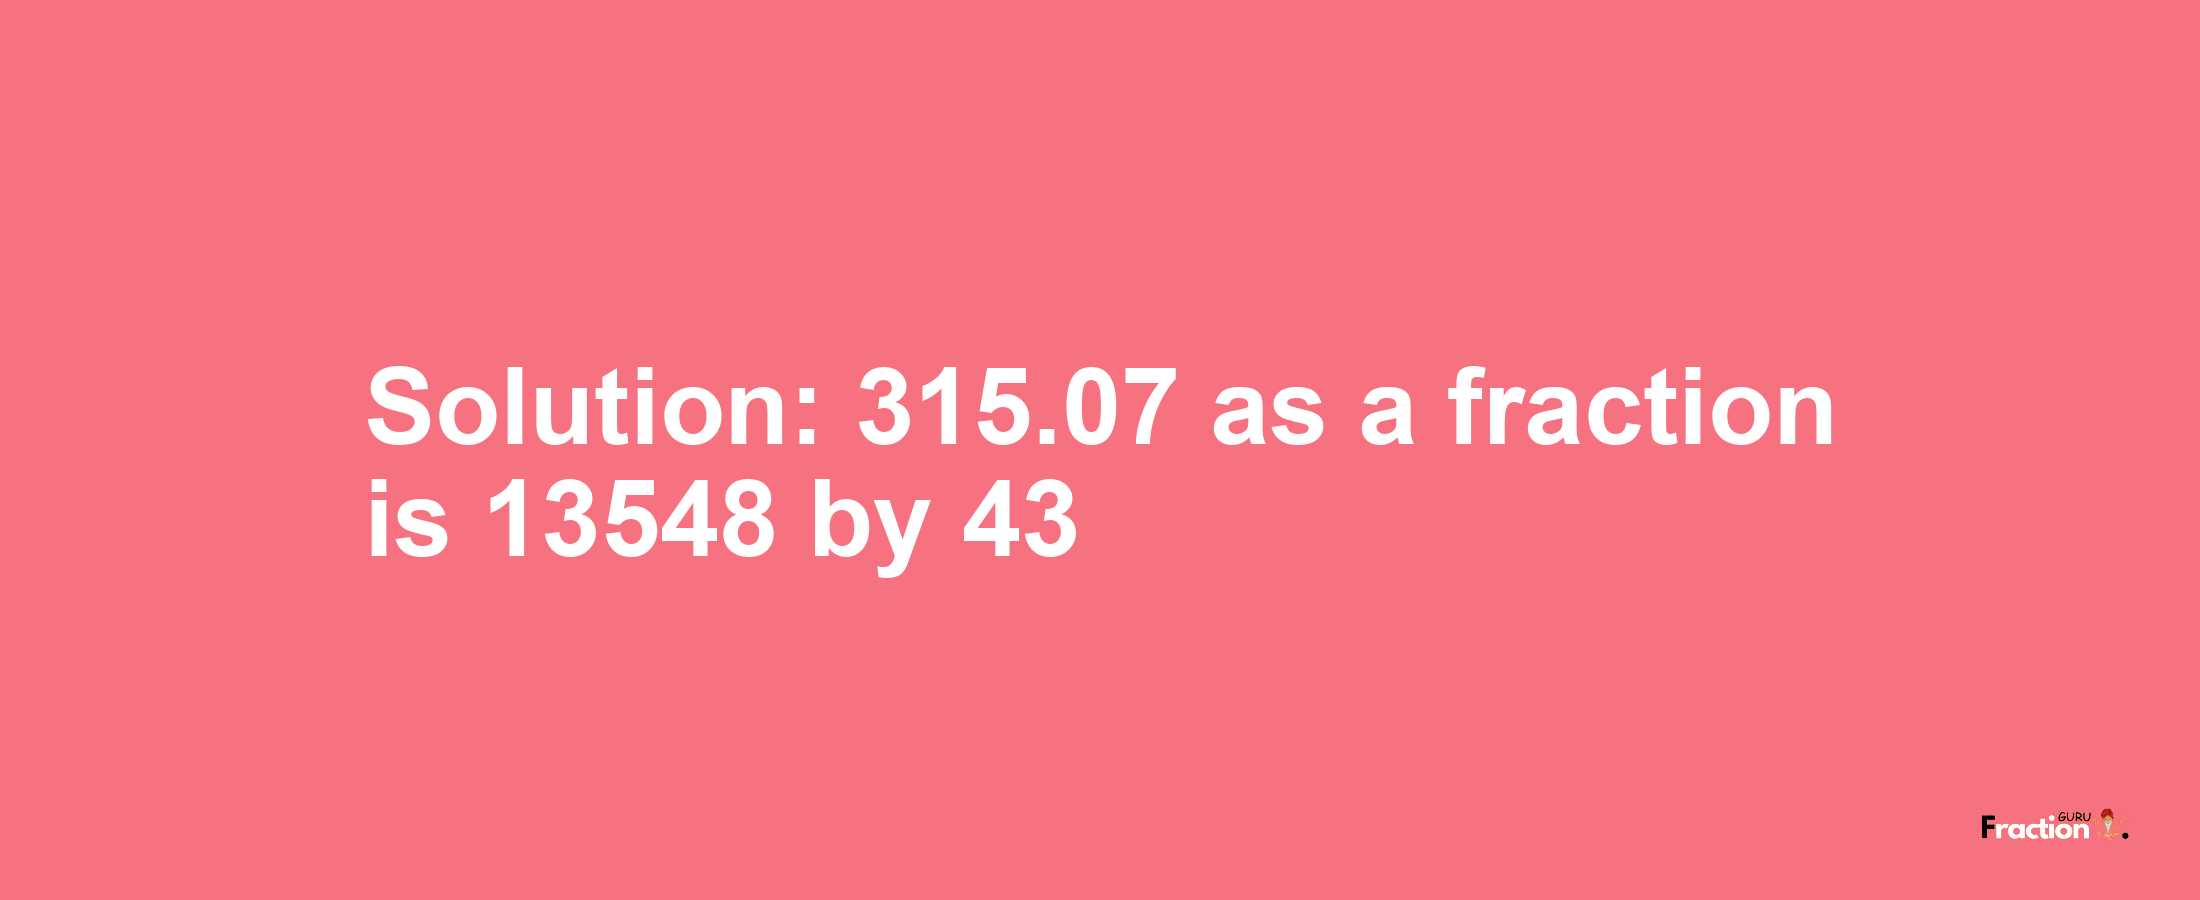 Solution:315.07 as a fraction is 13548/43